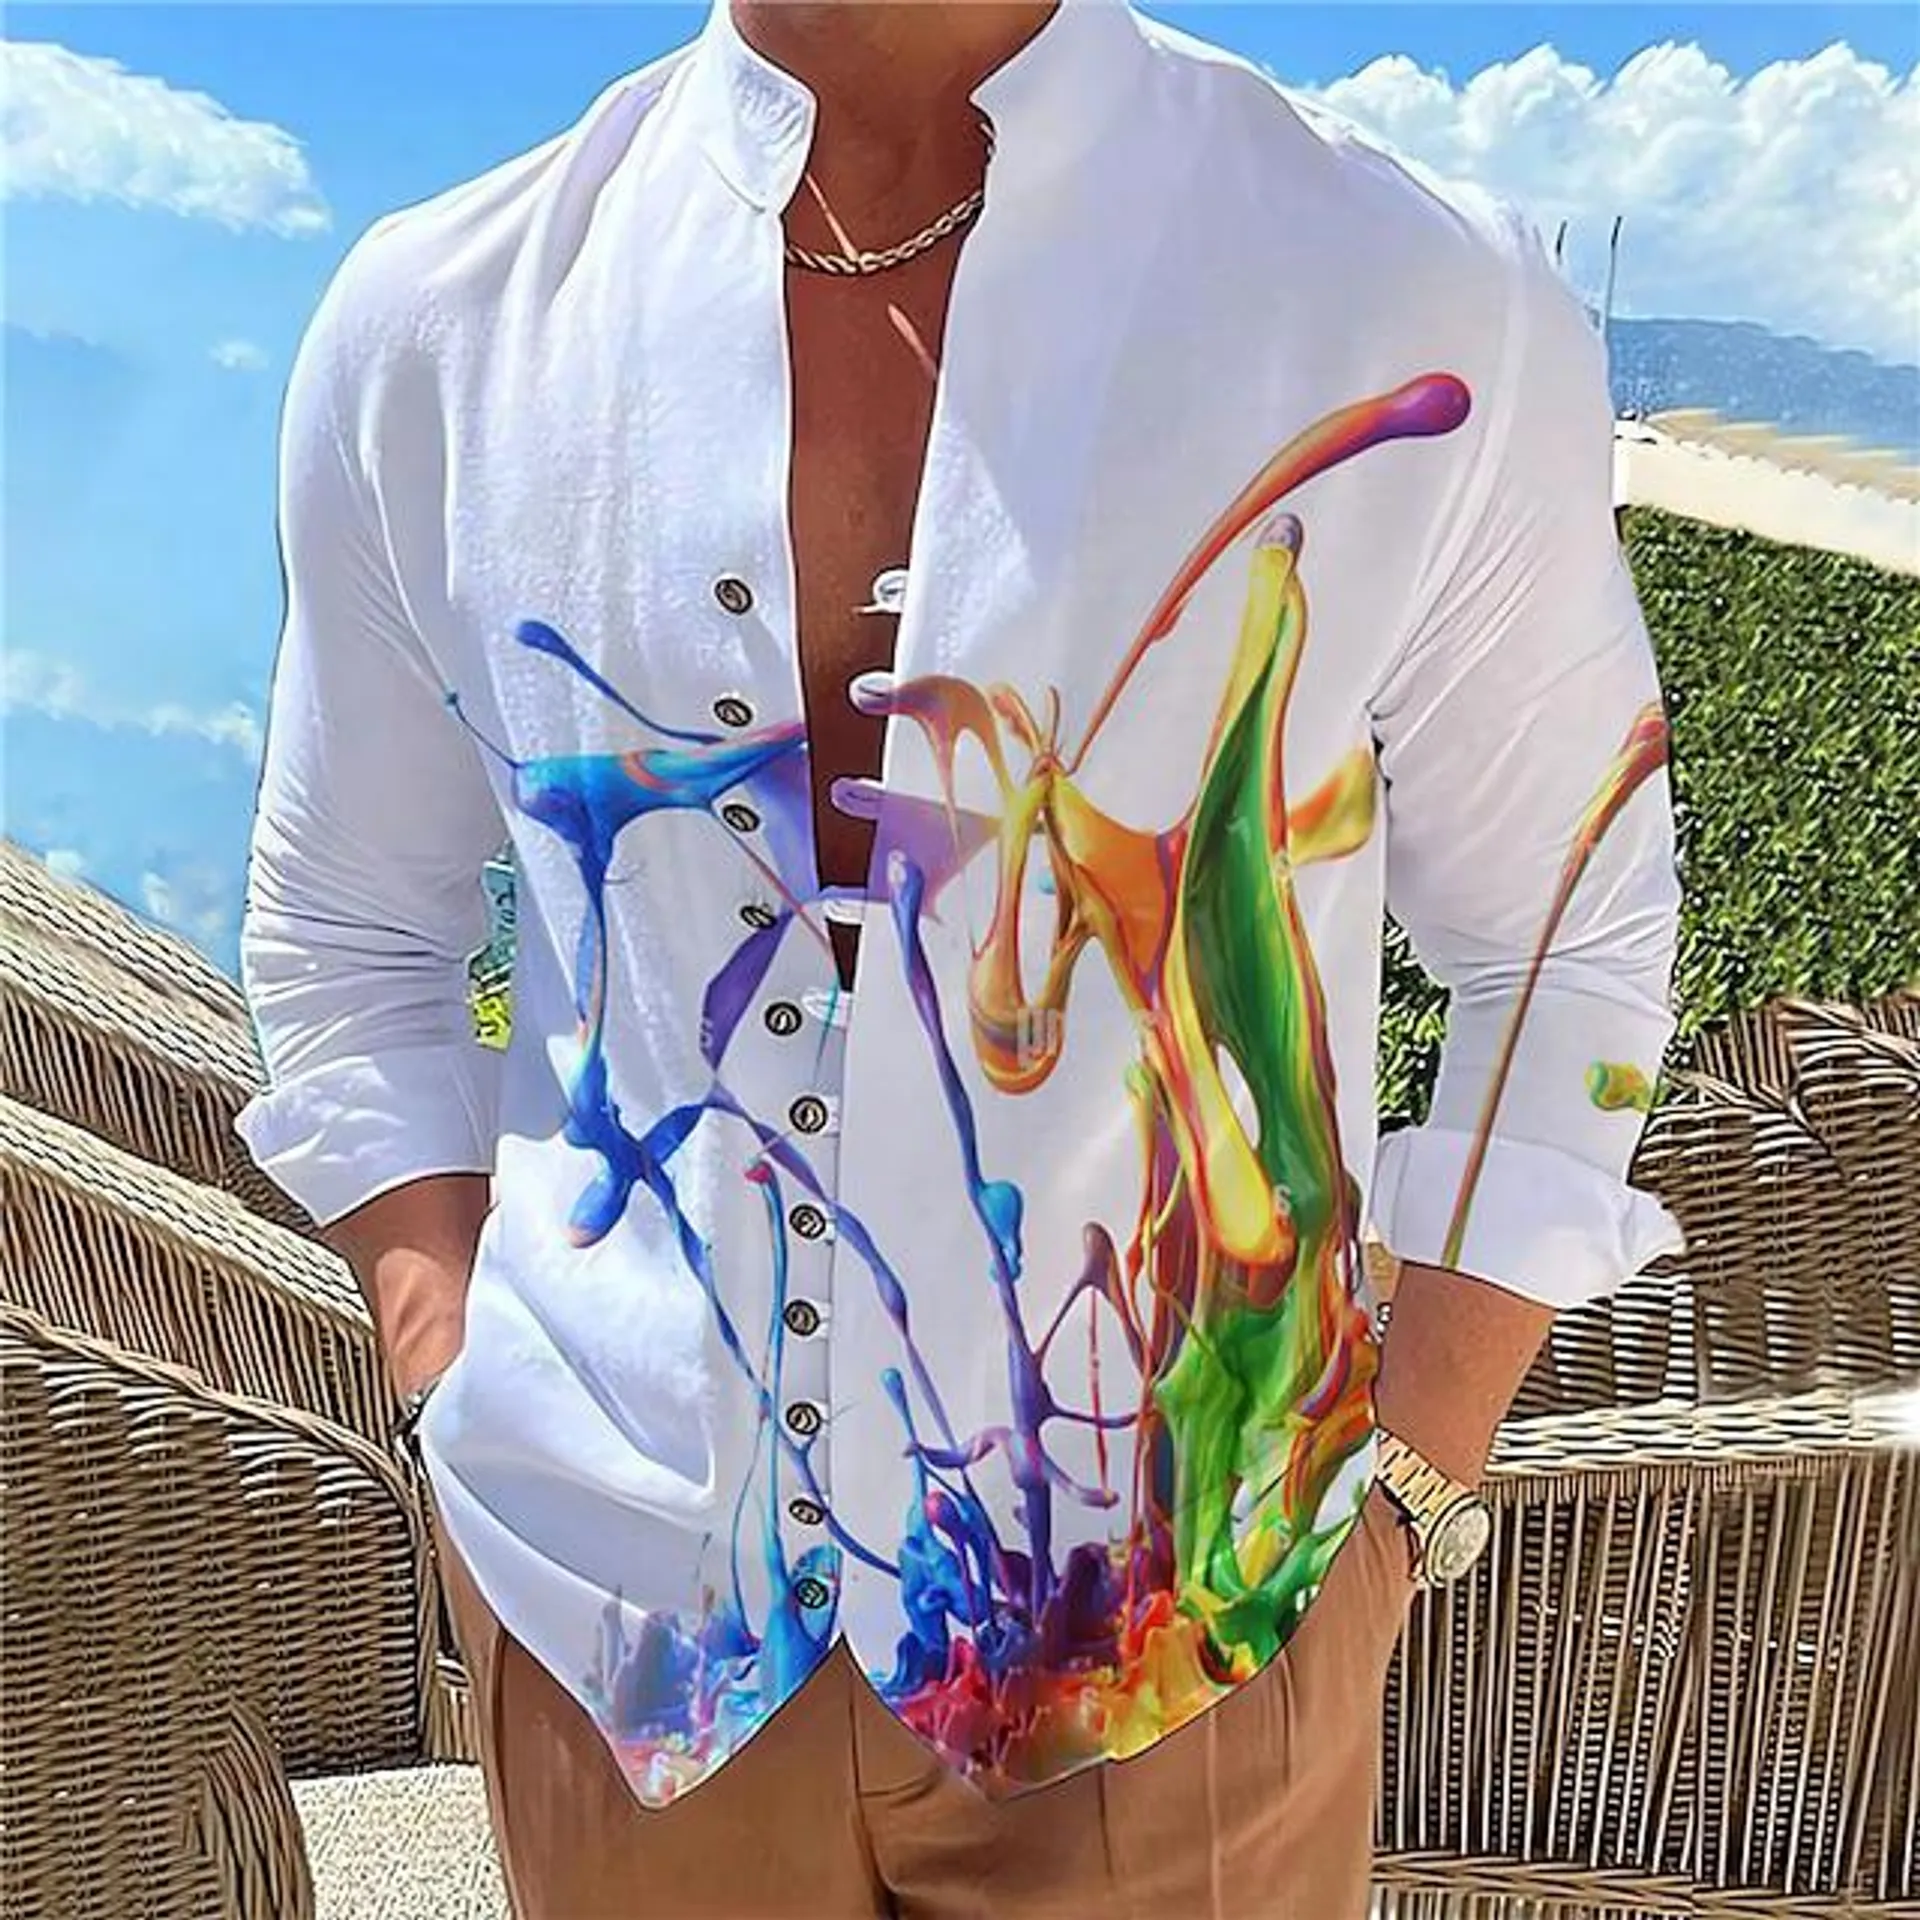 Men's Shirt Gradient Graphic Prints Stand Collar Yellow Blue Green Gray Outdoor Street Long Sleeve Print Clothing Apparel Fashion Designer Casual Comfortable